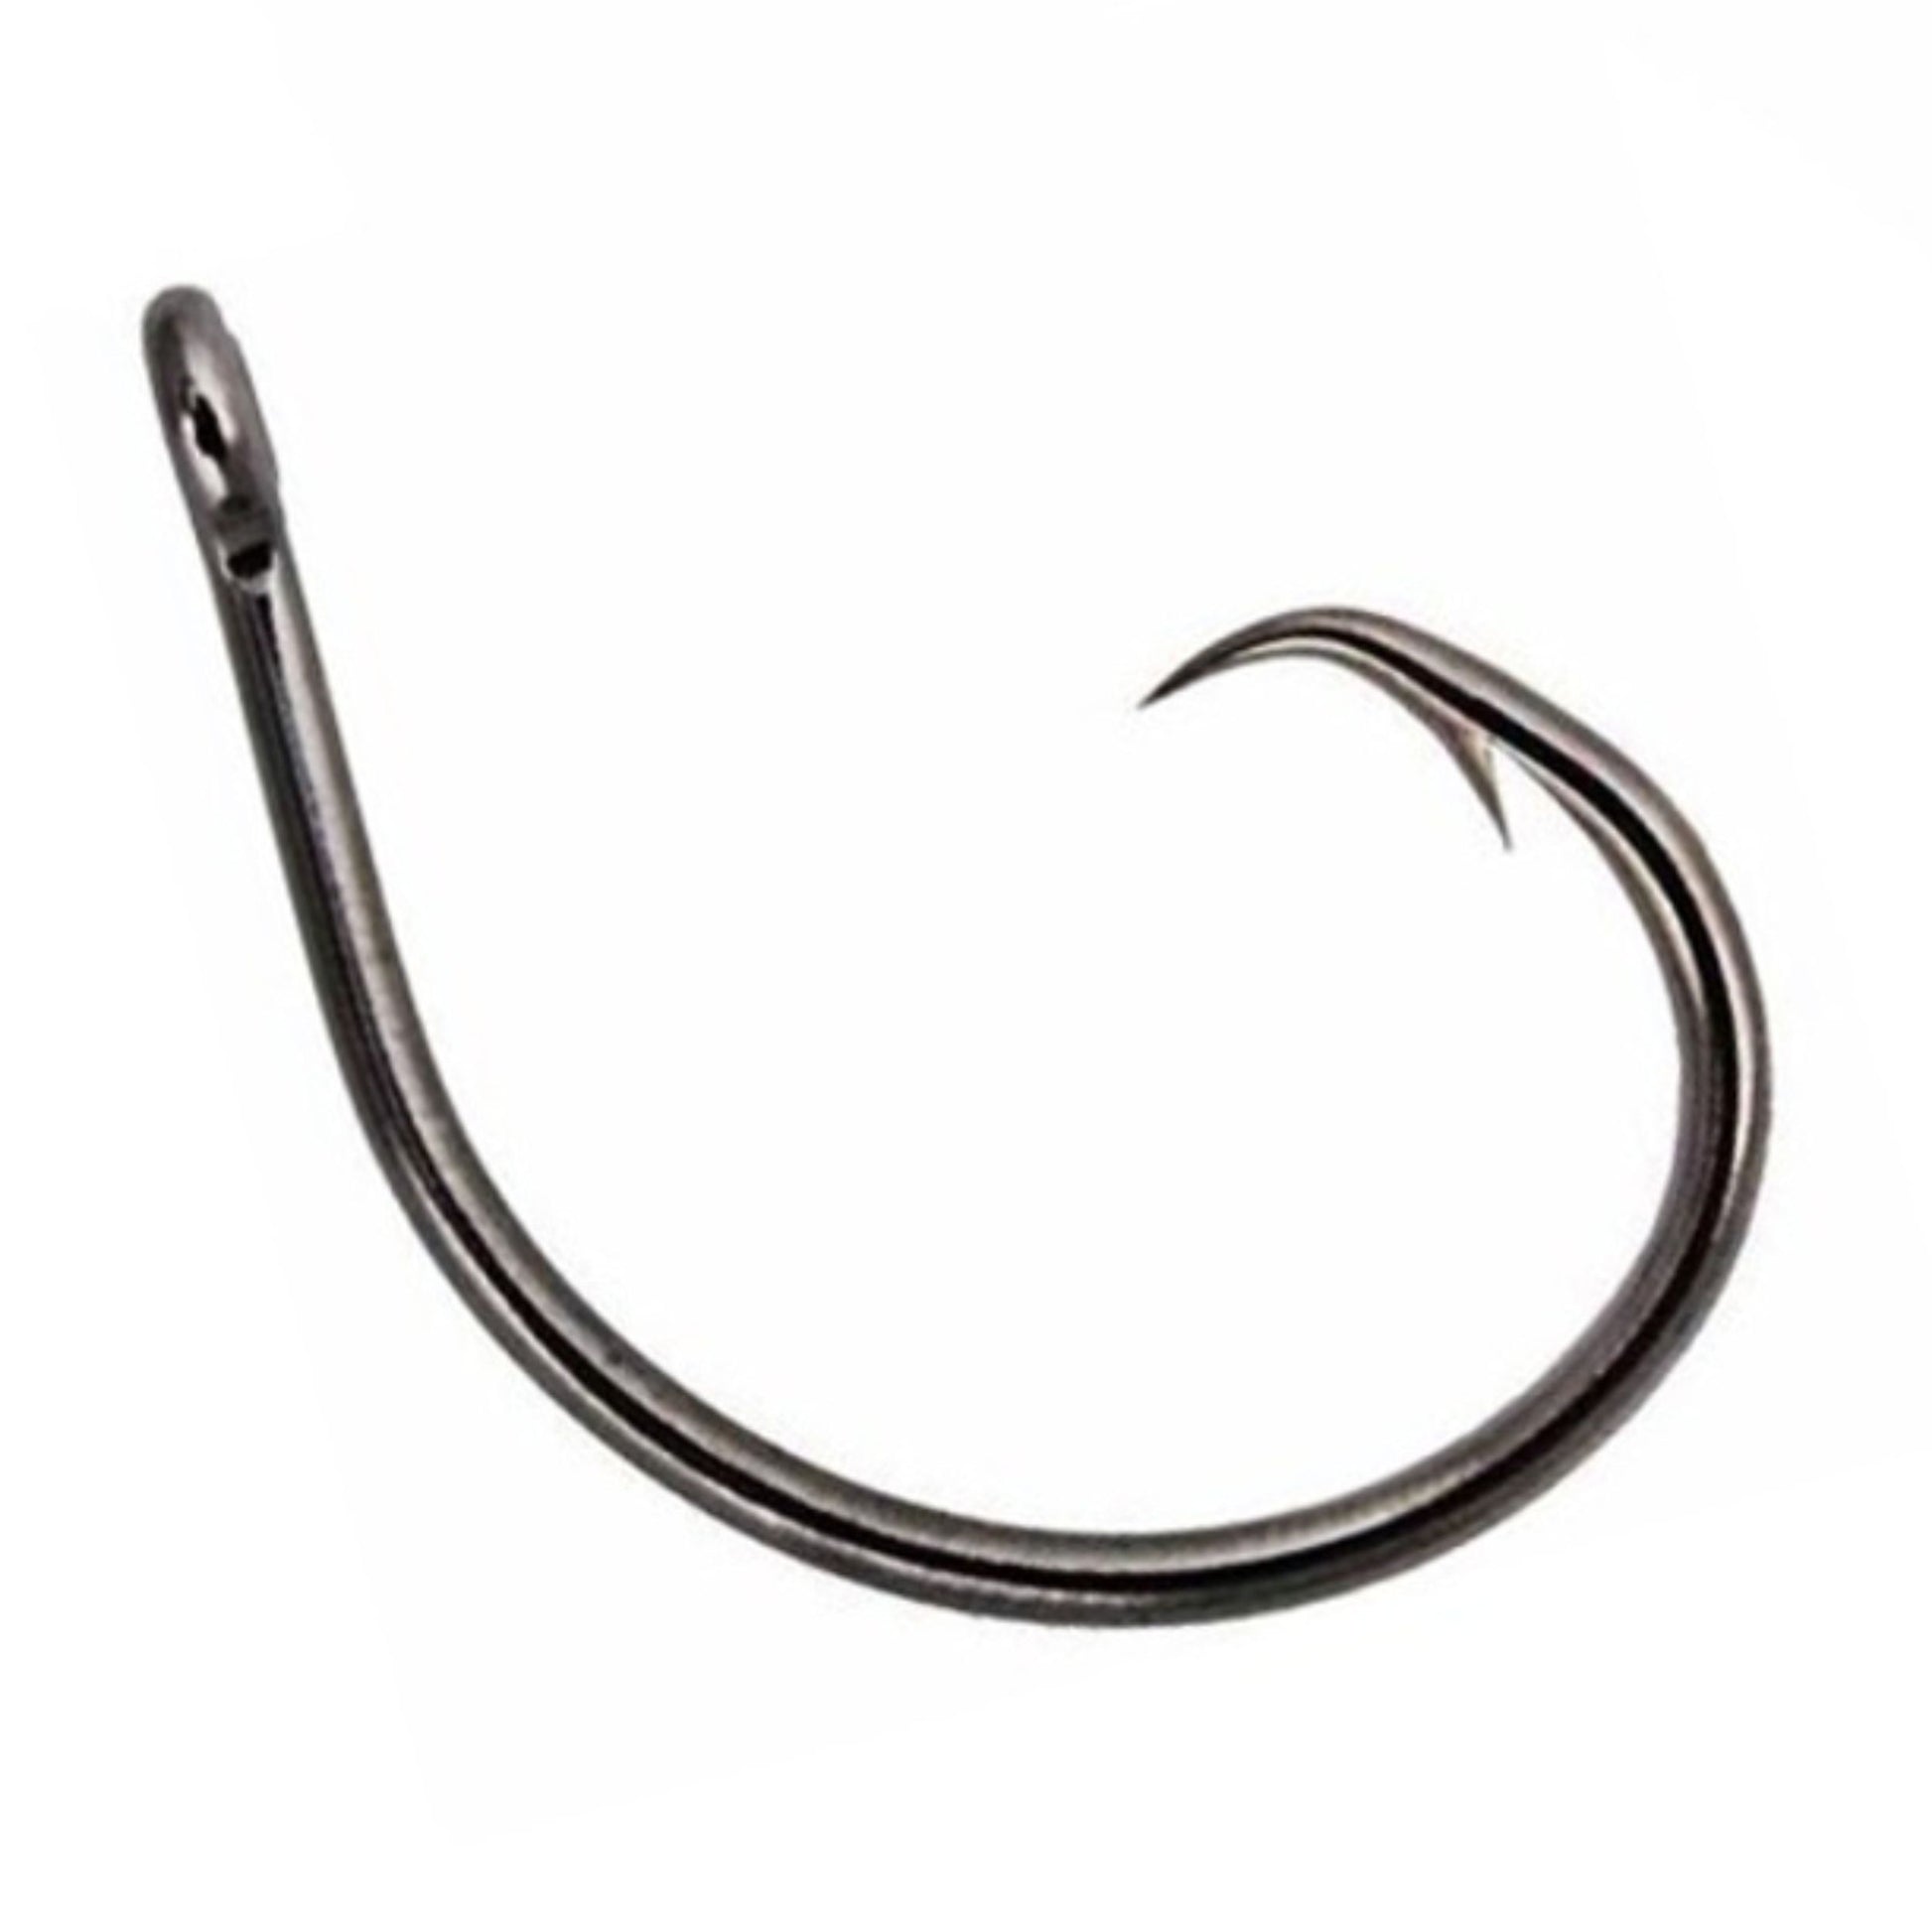 Reaction Tackle Premium Circle Hooks-25 Pack, 60% OFF